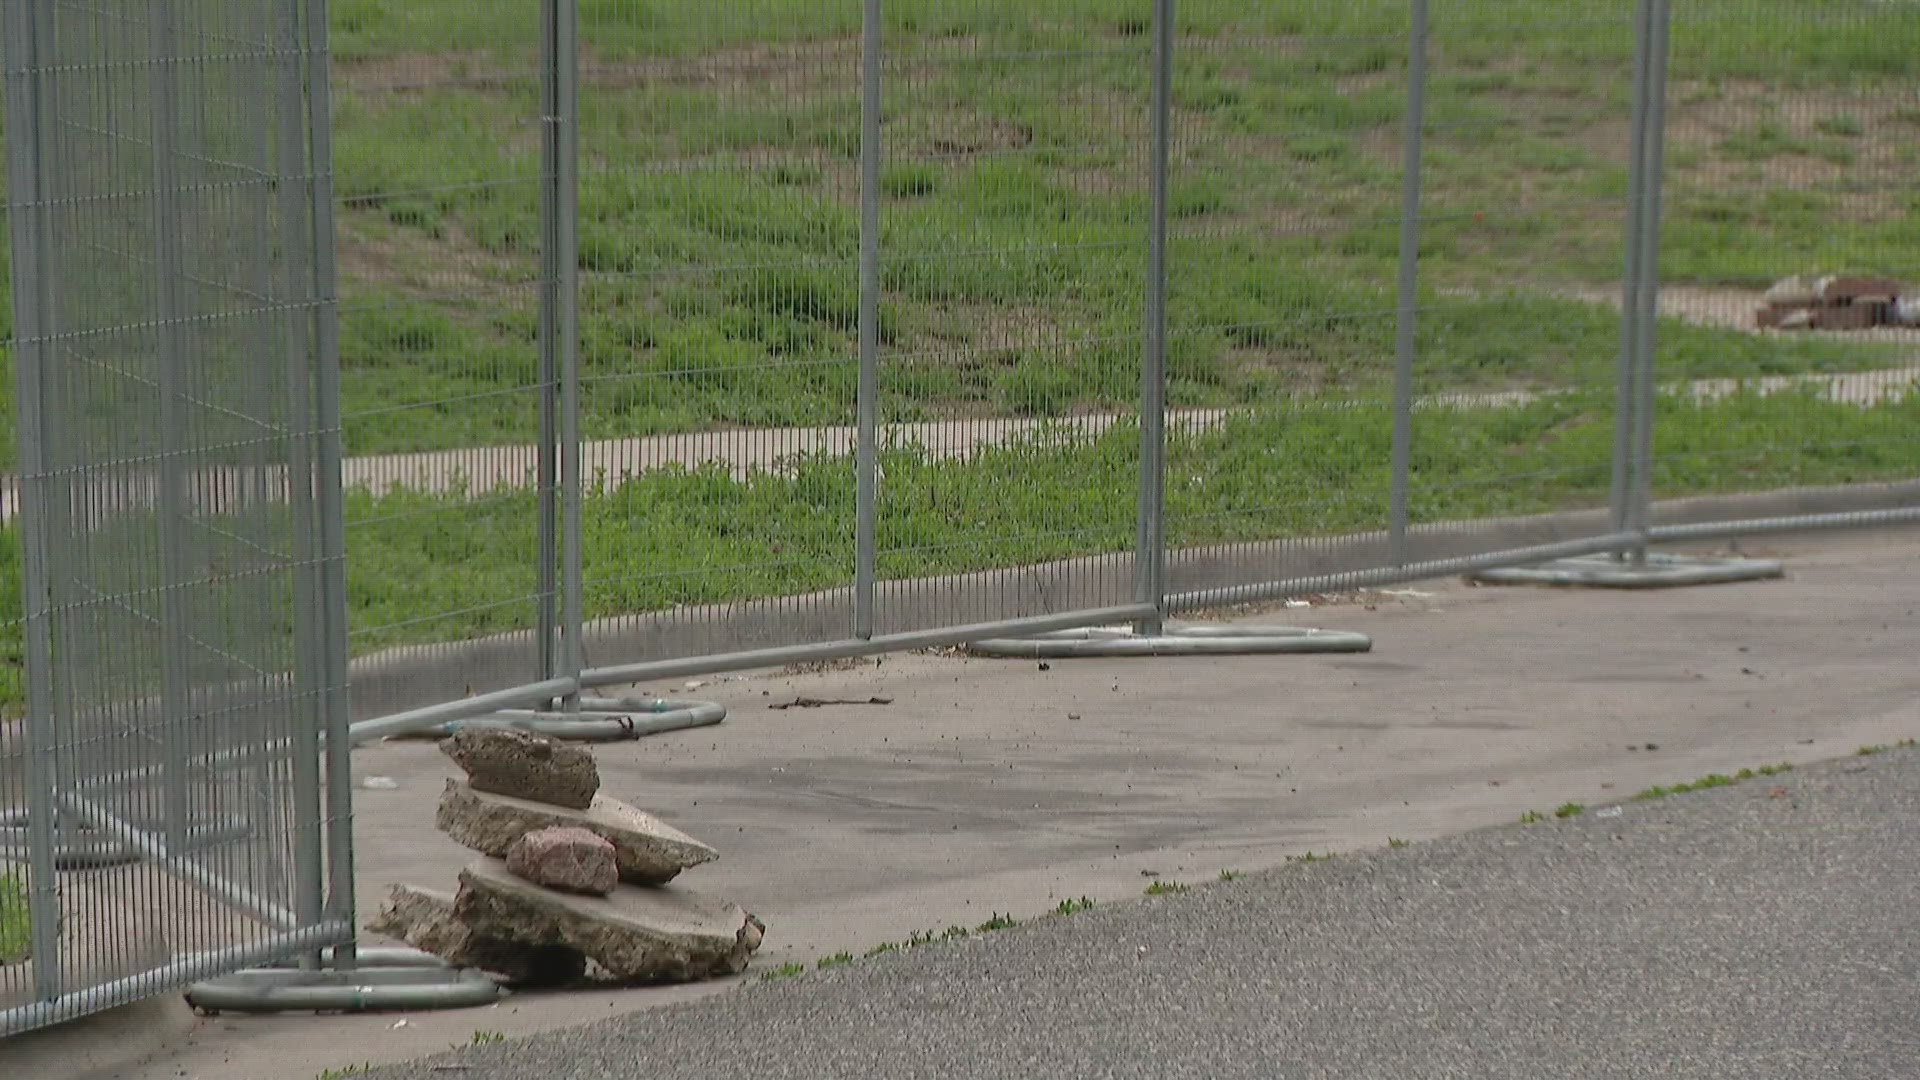 Denver's Uptown neighborhood is down a sidewalk after the city put up a giant metal fence to deter encampments.